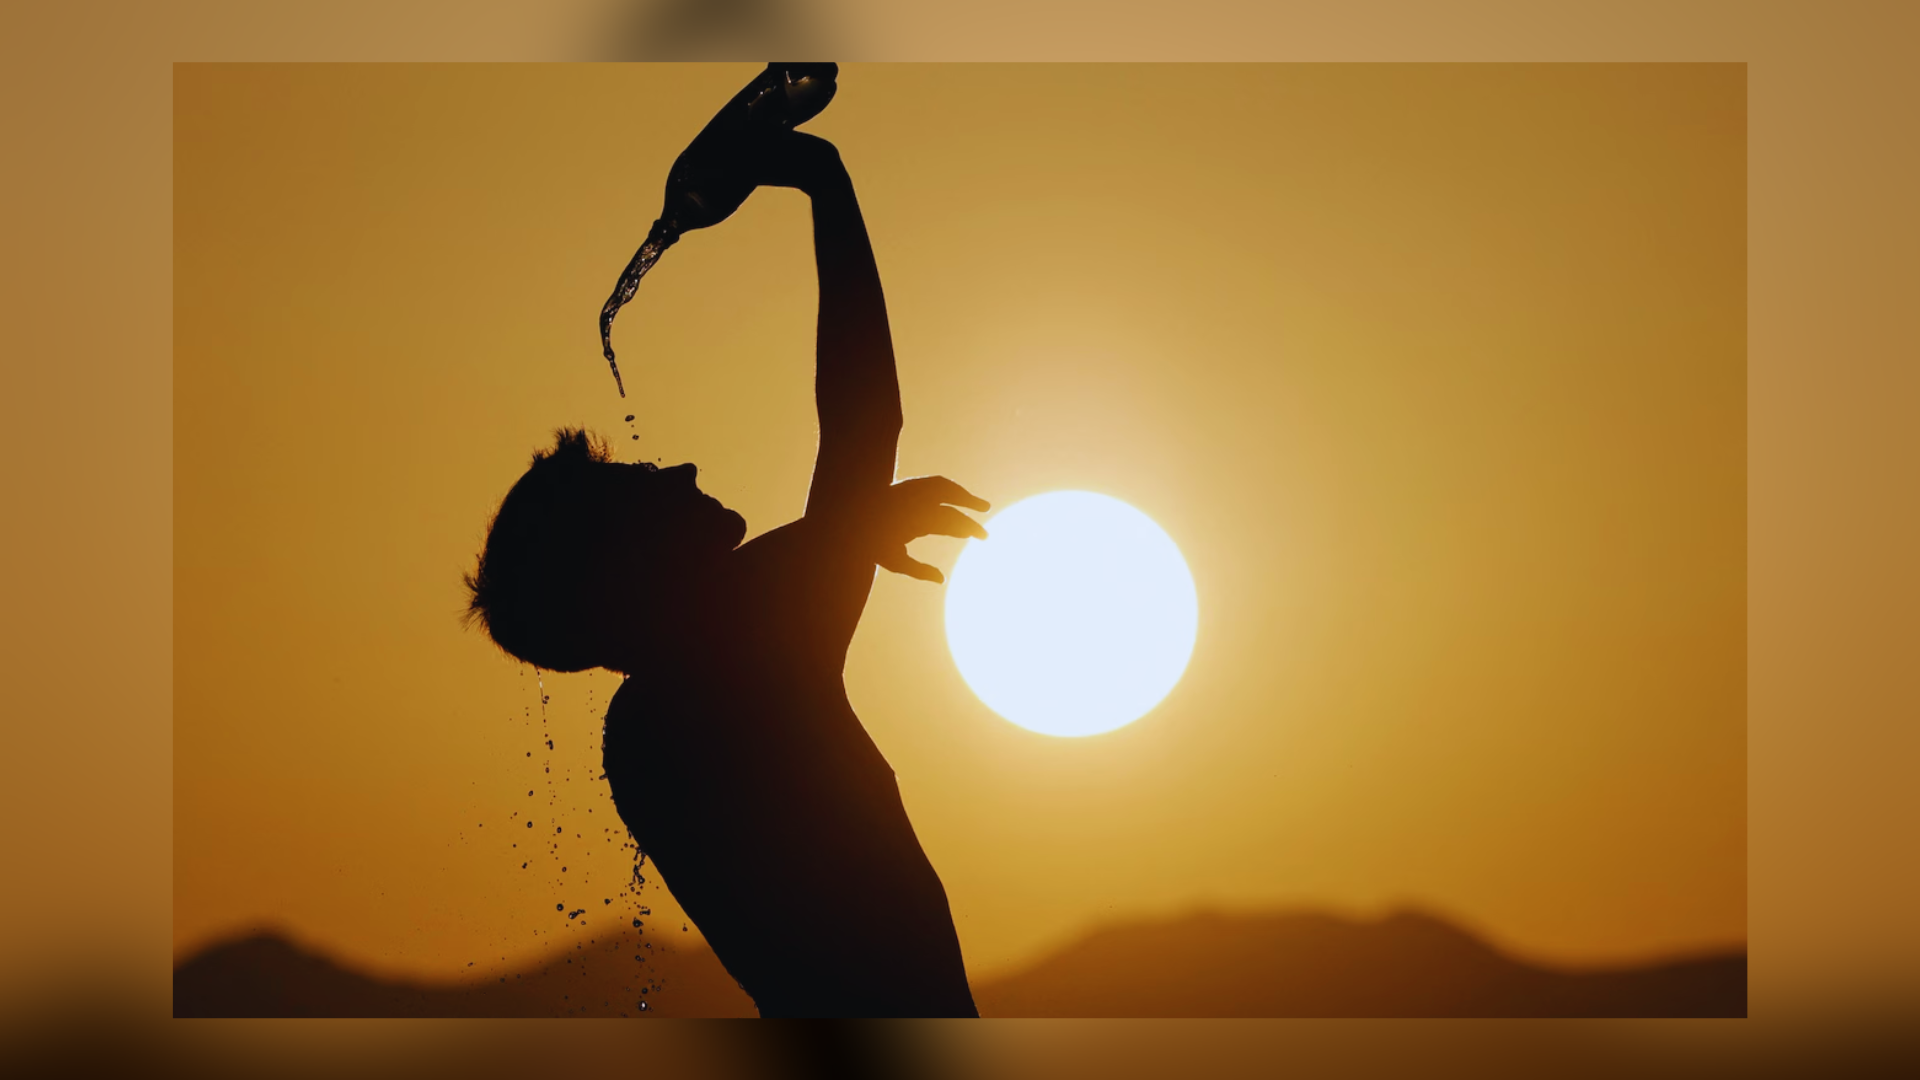 Delhi Govt Orders Early Summer Break For Private Schools Due To Heatwave; IMD Warns Of Extended High Temperatures Nationwide